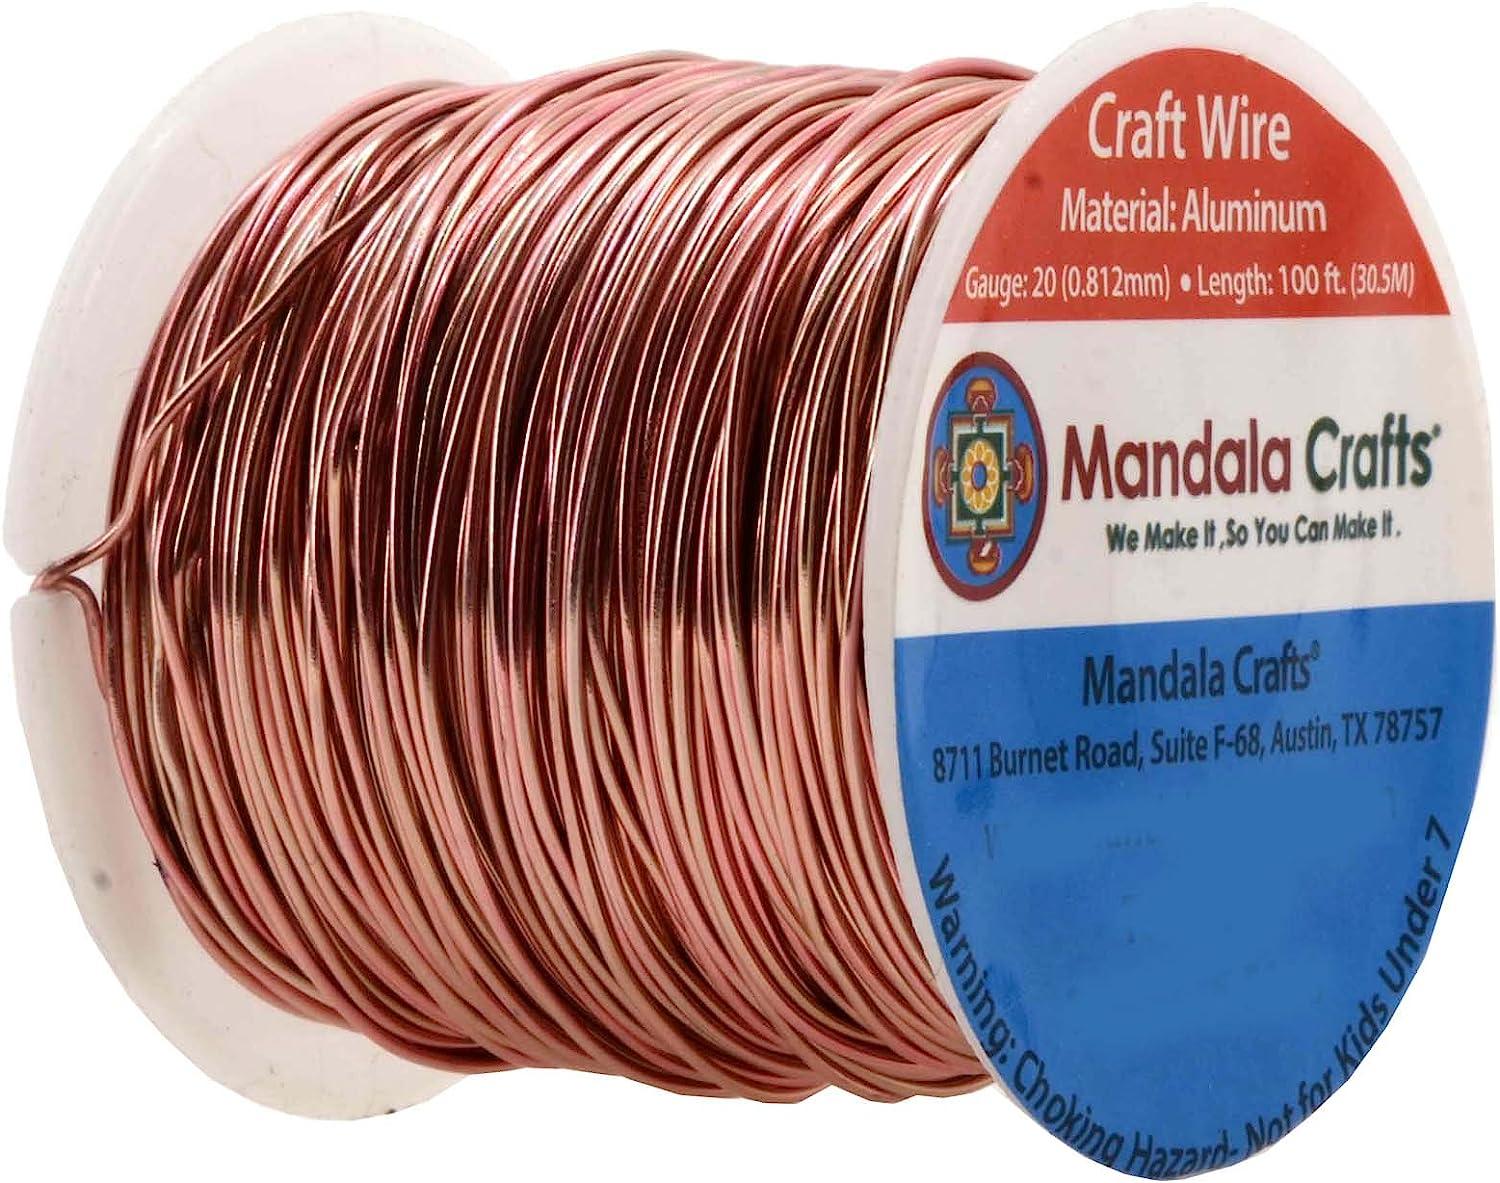 Mandala Crafts Thin Copper Wire for Jewelry Making, Sculpting